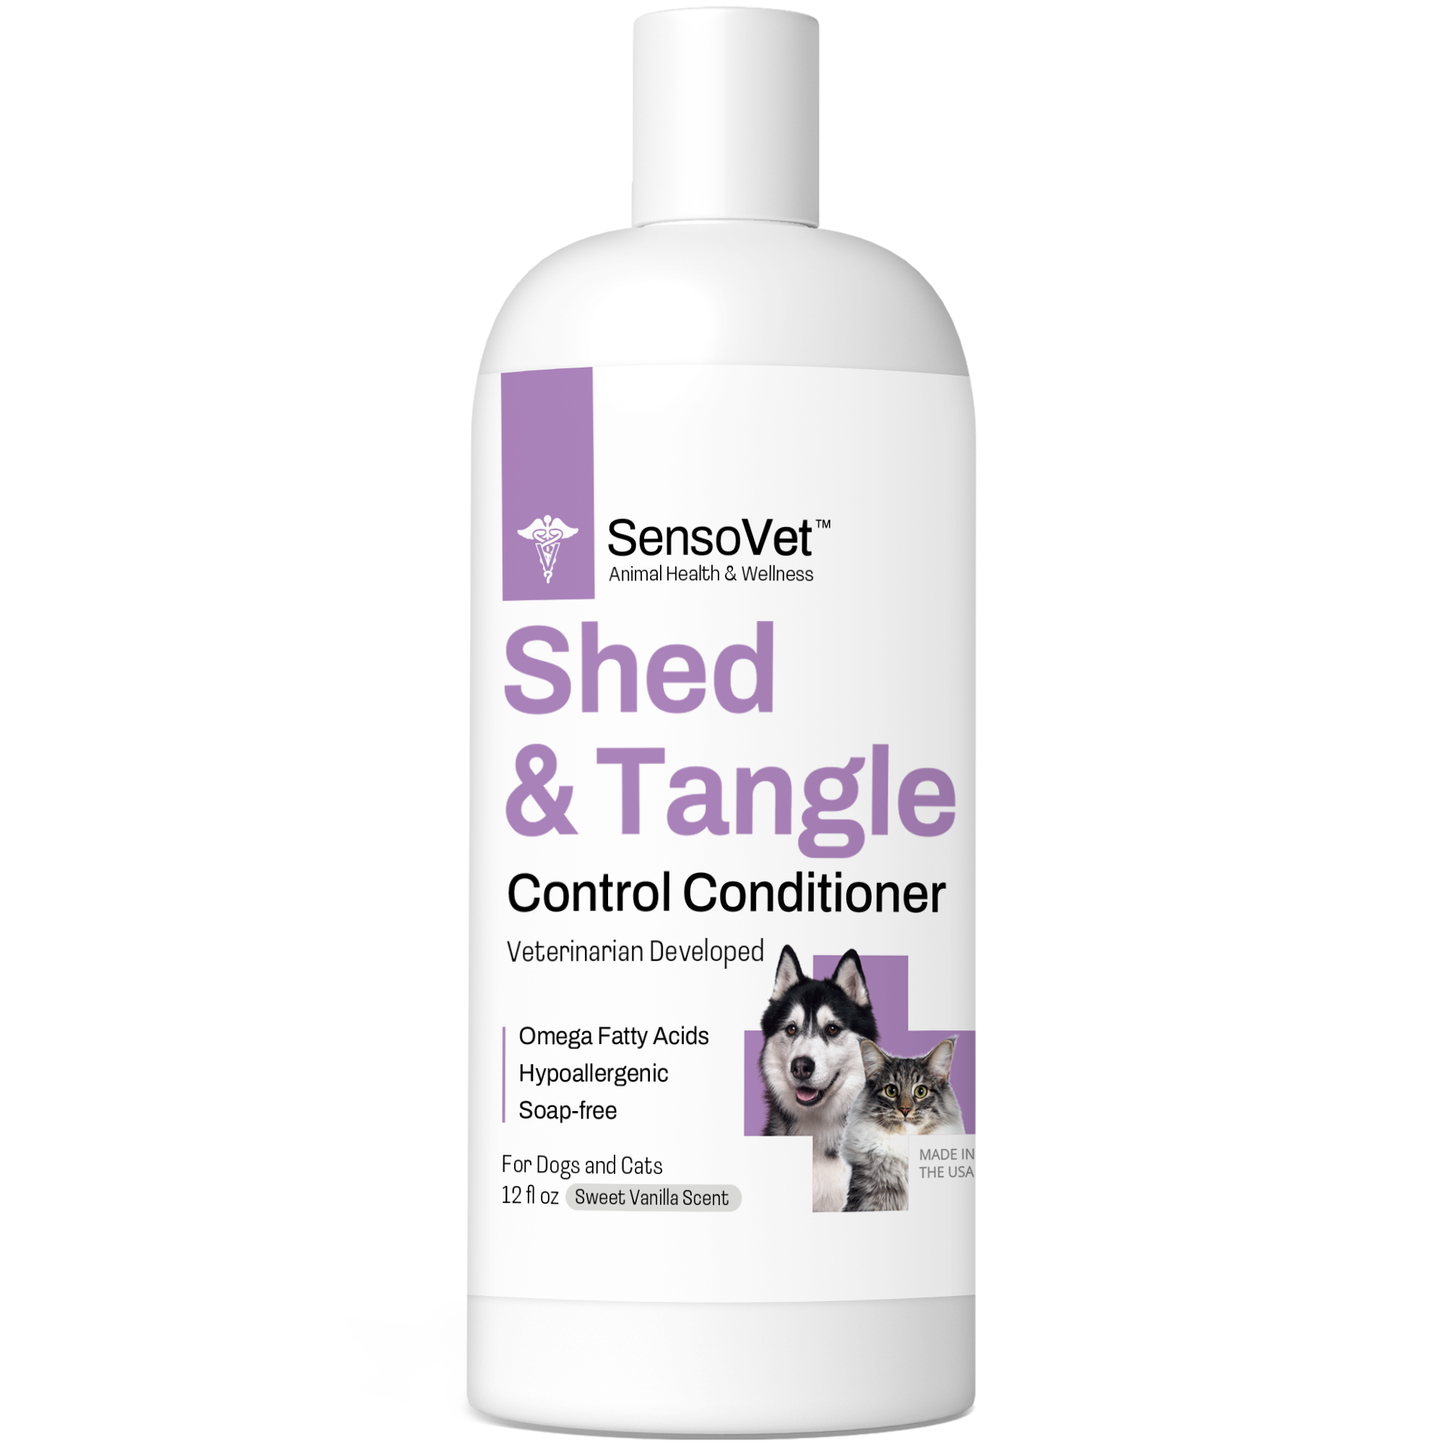 SensoVet Shed & Tangle Control Conditioner for dogs and cats